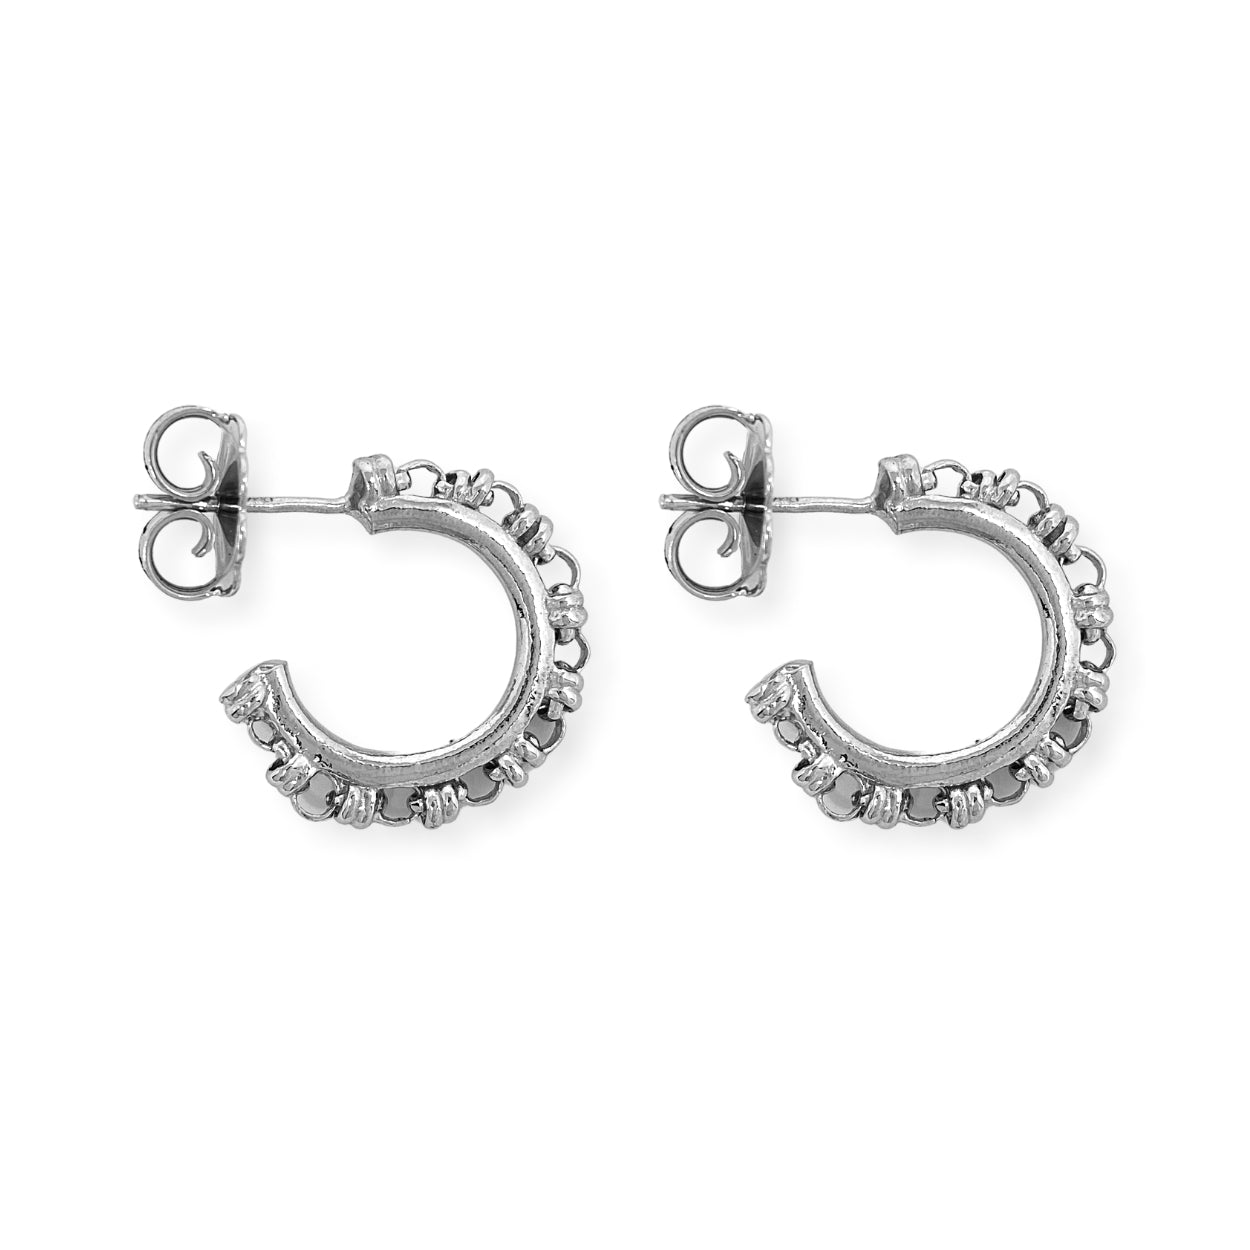 A closeup of silver hoop earrings designed and hand-crafted by DelBrenna Italian Jewelers in Tuscany. The earrings are designed based on the iconic Links collection of DelBrenna silver chains, necklaces, rings, and bracelets. 